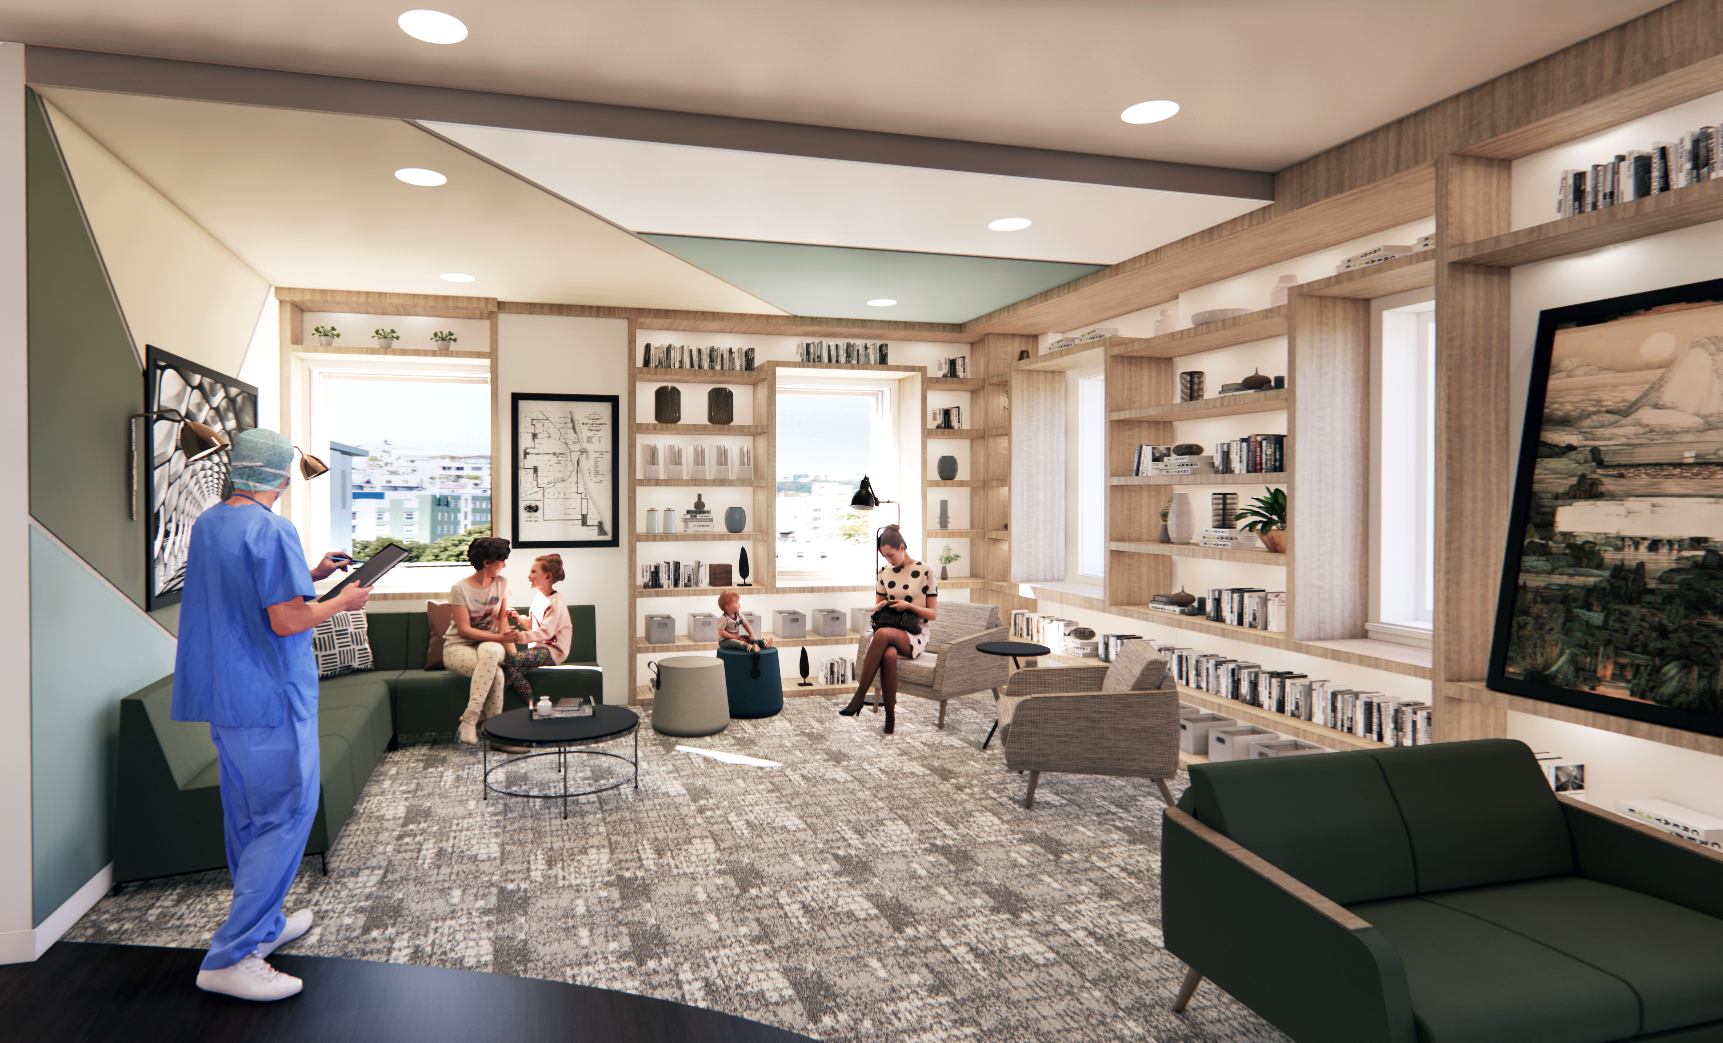 Rendered perspective of a doctors waiting office with built in shelving, chairs, sectionals, and sofas.